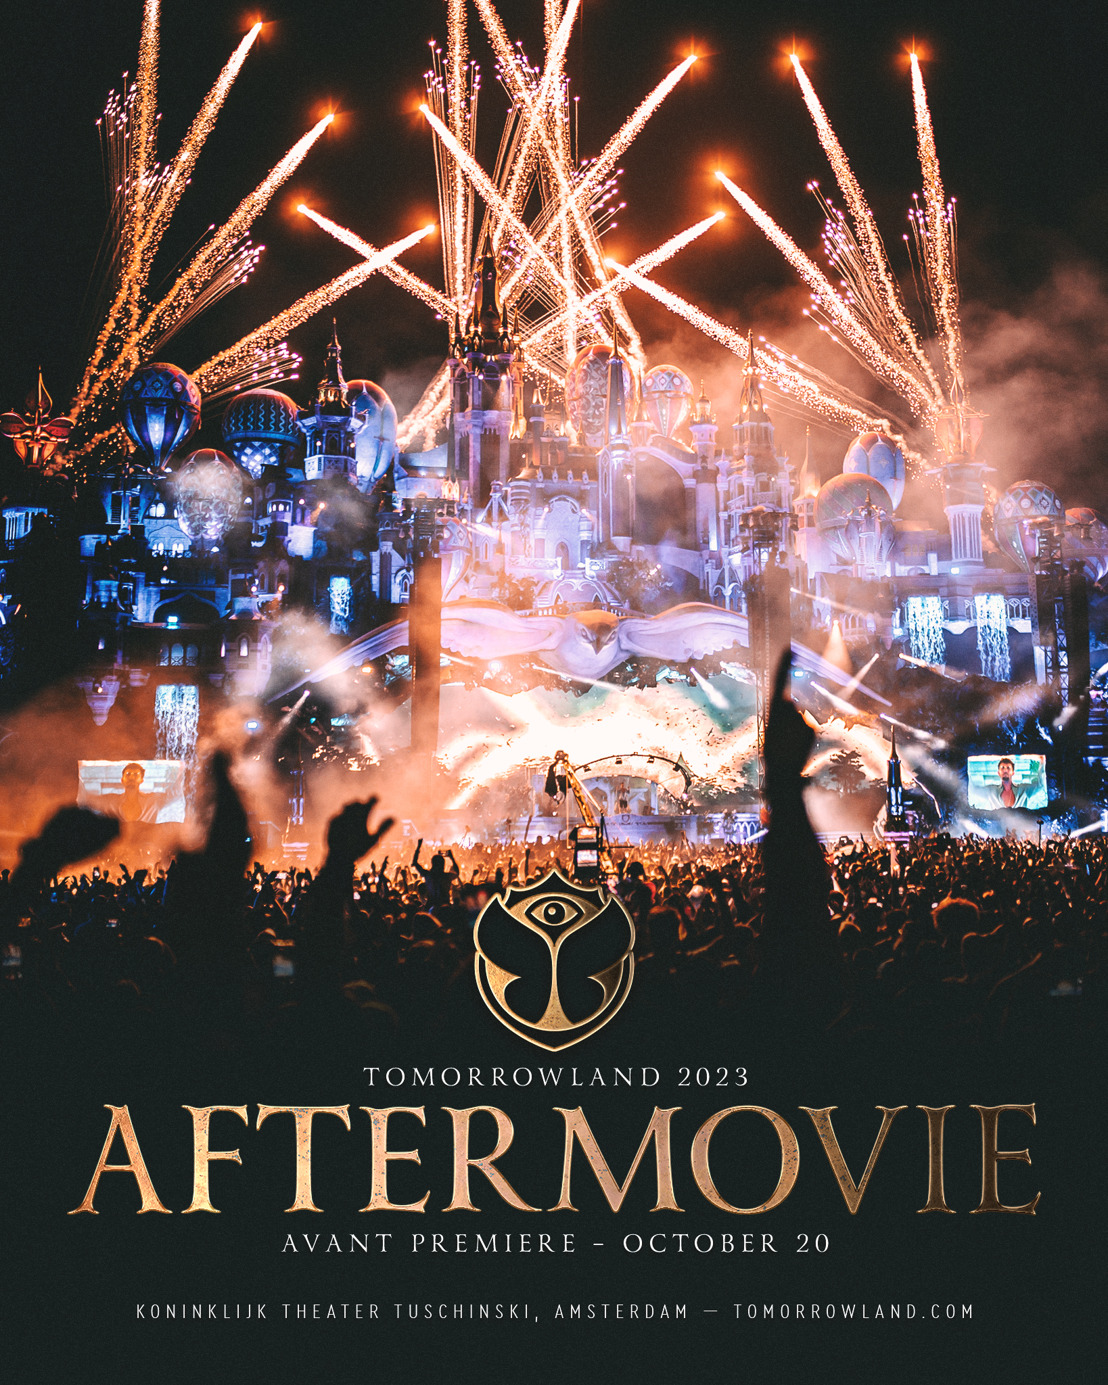 Tomorrowland is holding an exclusive avant premiere 
of the official 2023 aftermovie in Amsterdam